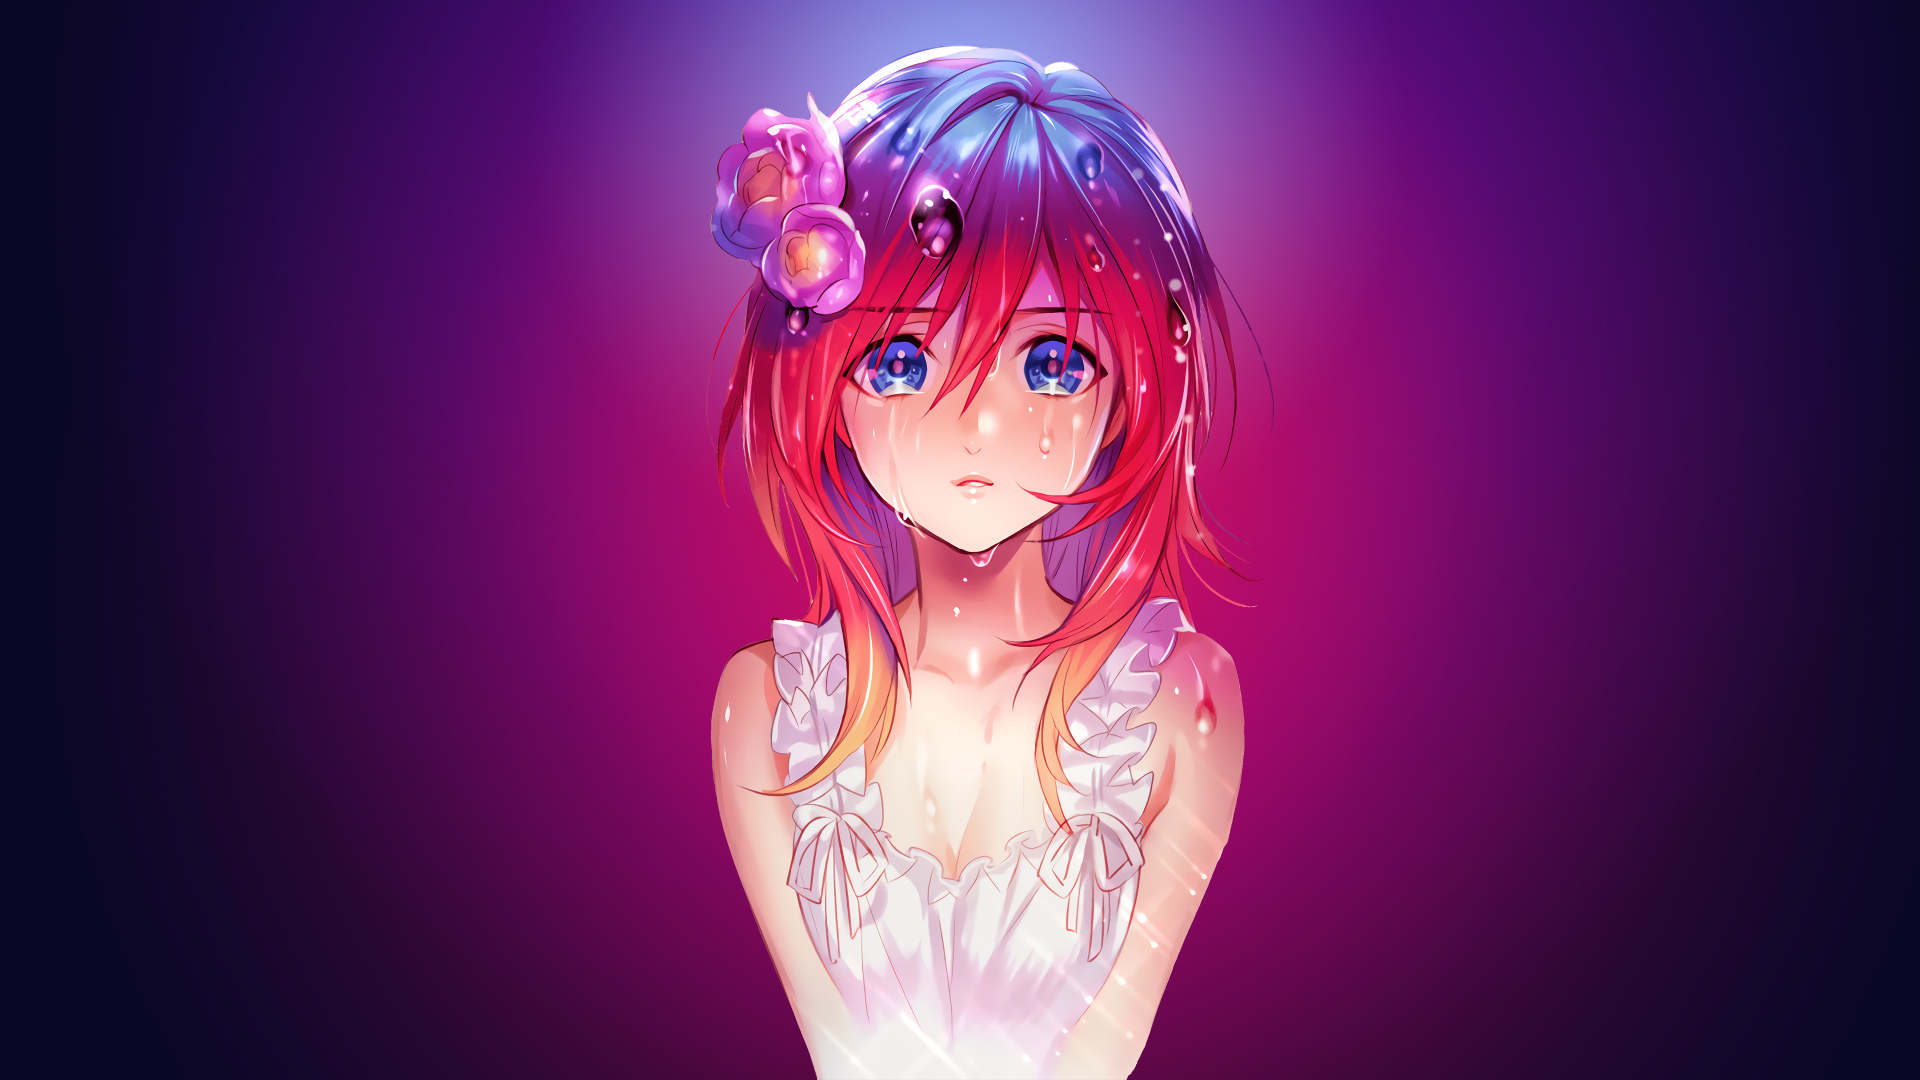 Wallpaper Cute anime girl with blue eyes